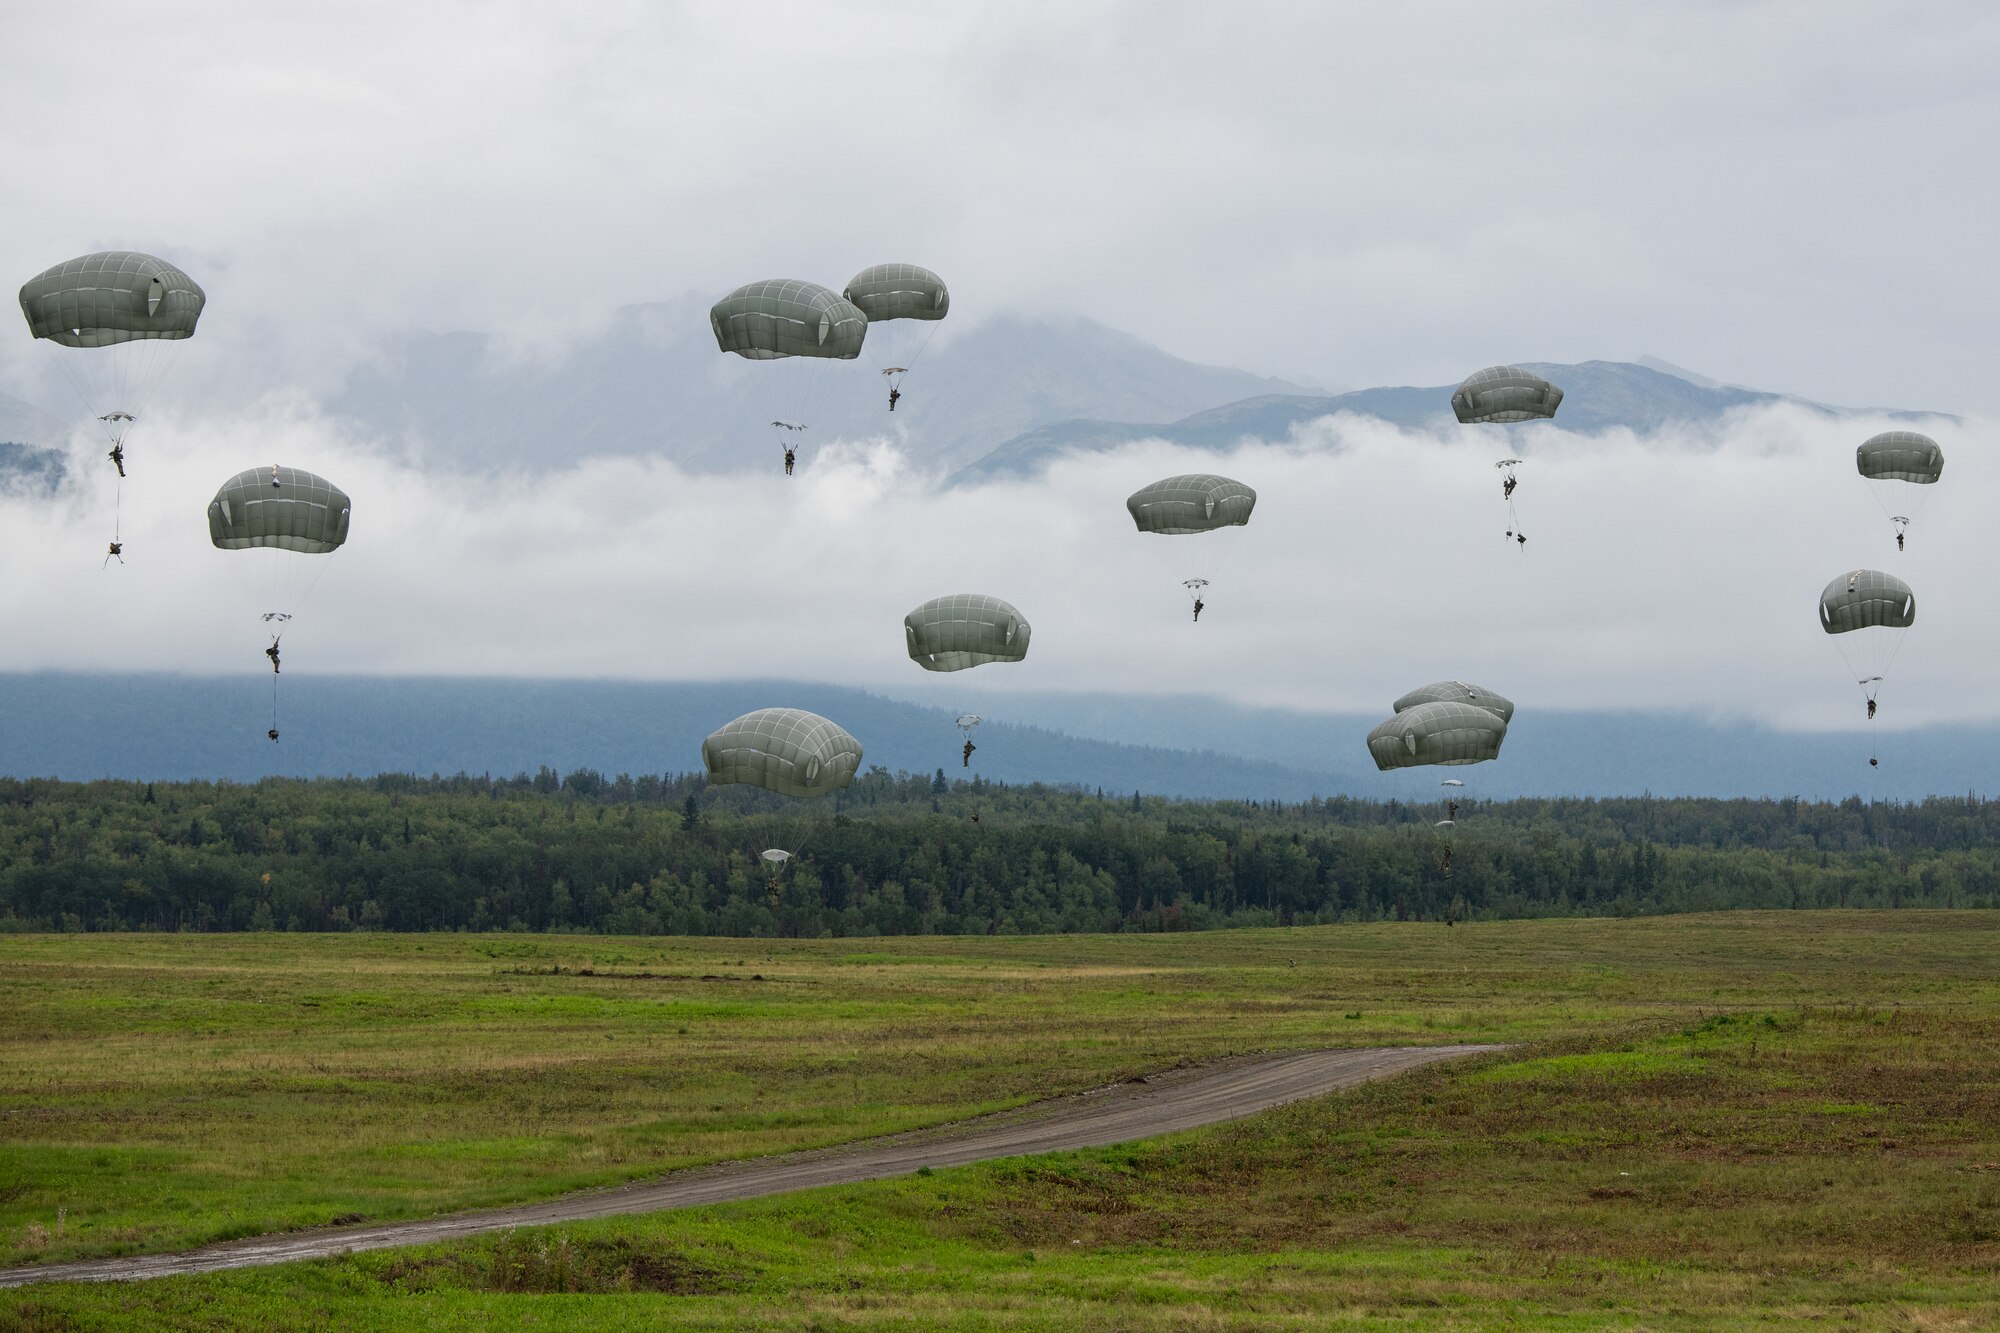 Soldiers float down with parachutes in front of a foggy mountain.